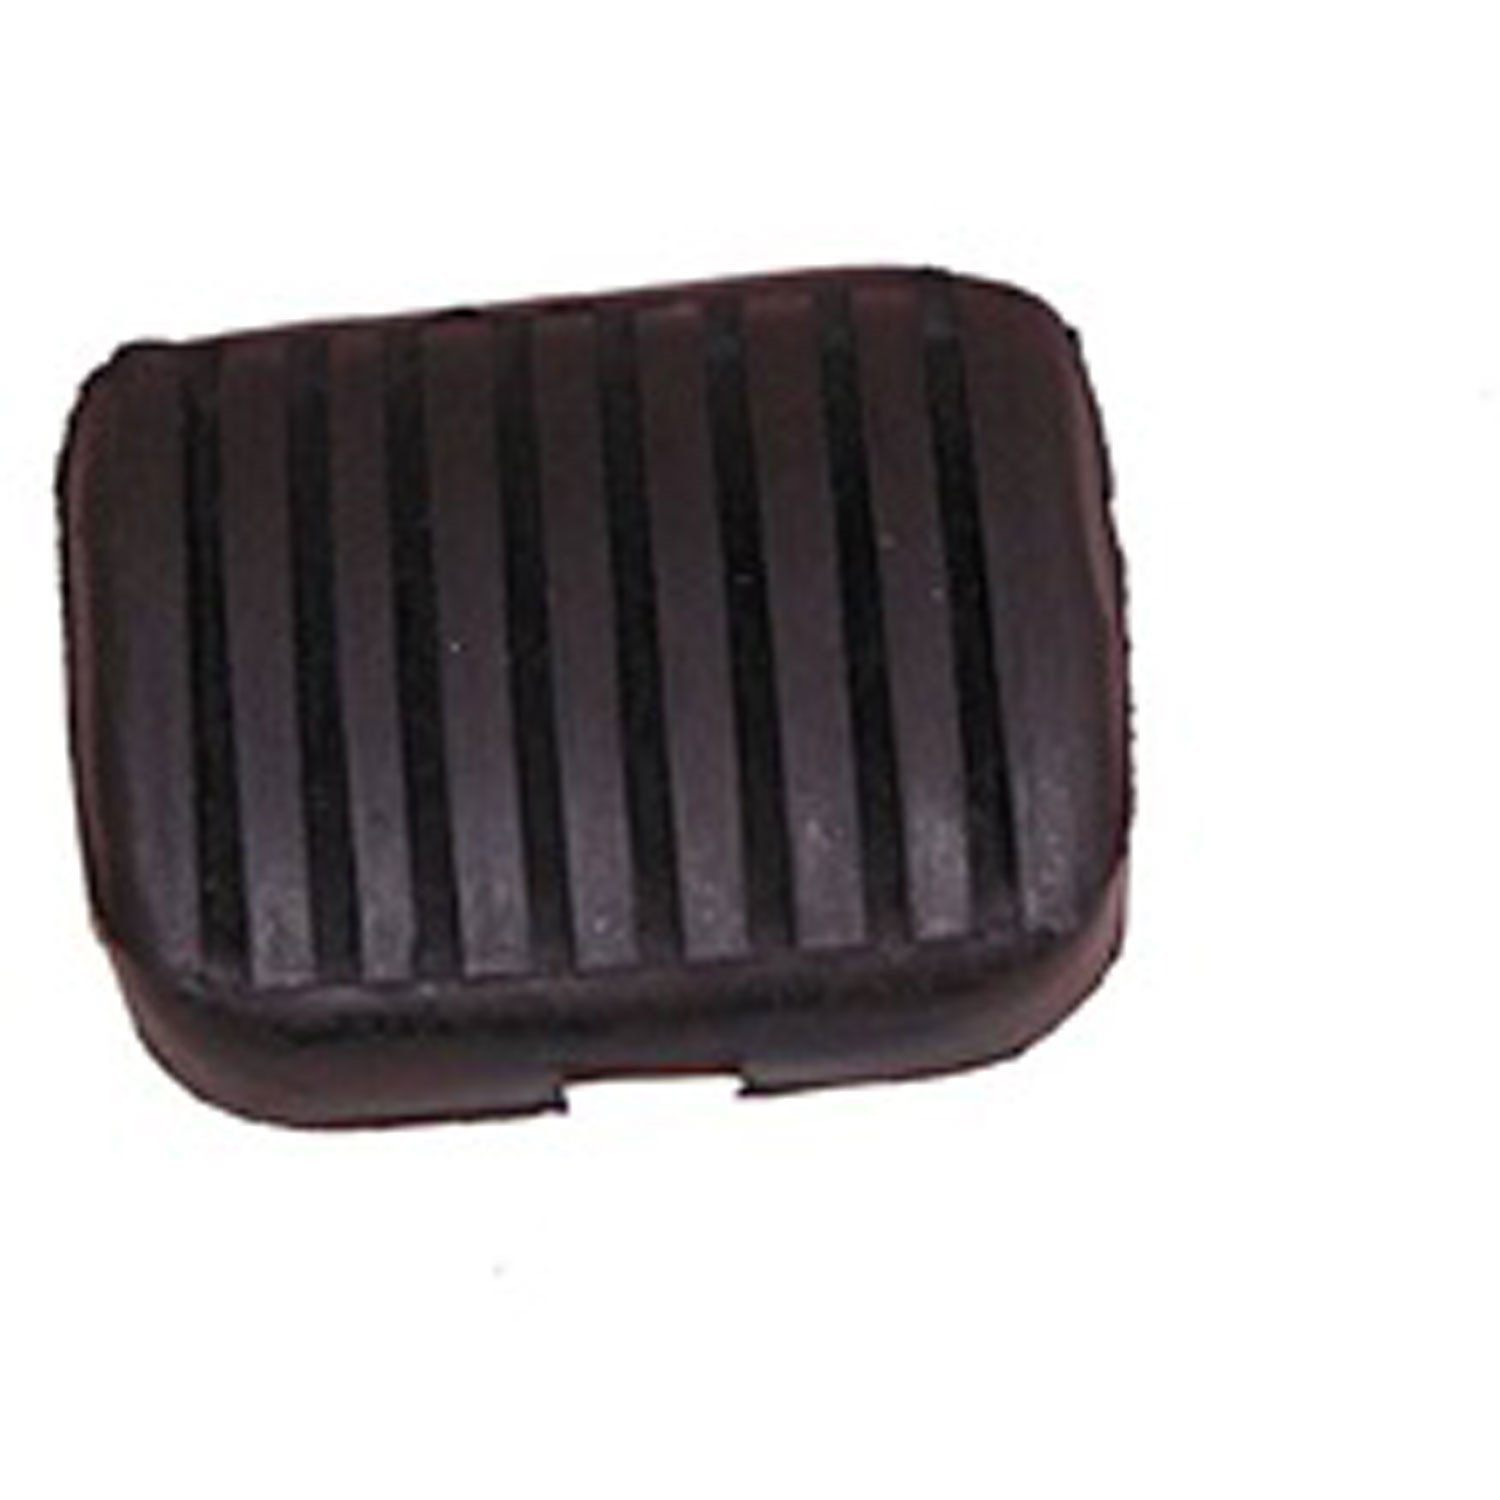 This replacement pedal pad from Omix-ADA fits 46-86 Willys / Jeep CJ models and 80-91 SJ SUVs / J-se